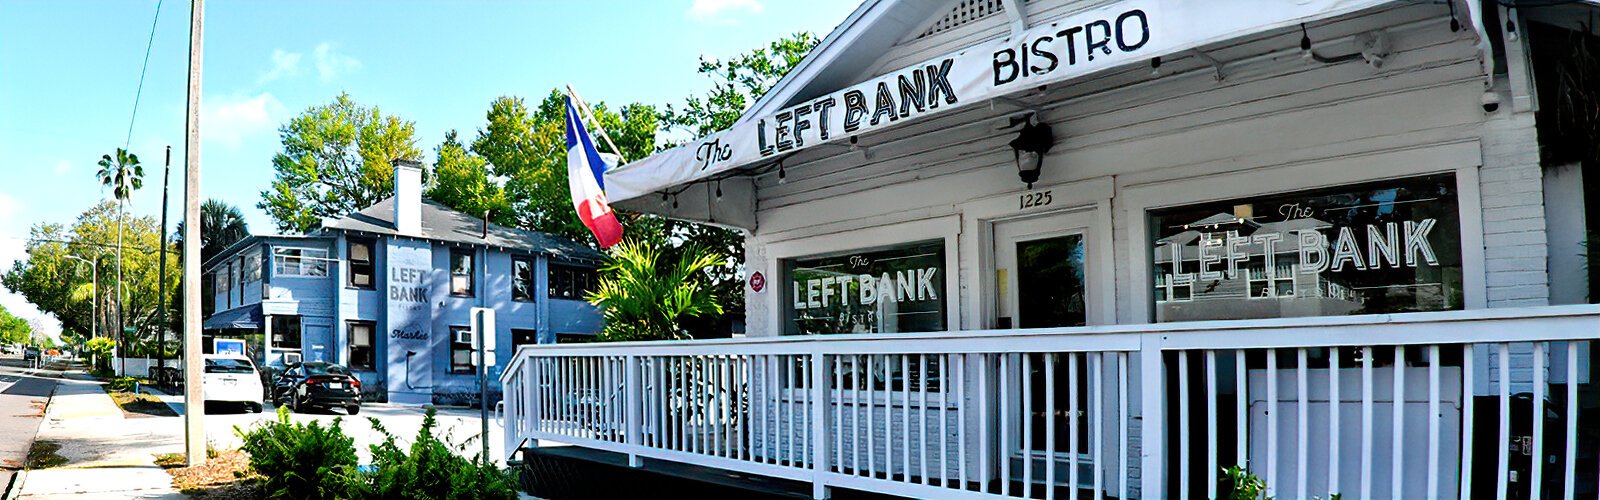 The Left Bank Bistro offers French-inspired fare as well as a unique shopping experience in the  next door Market at Left Bank.